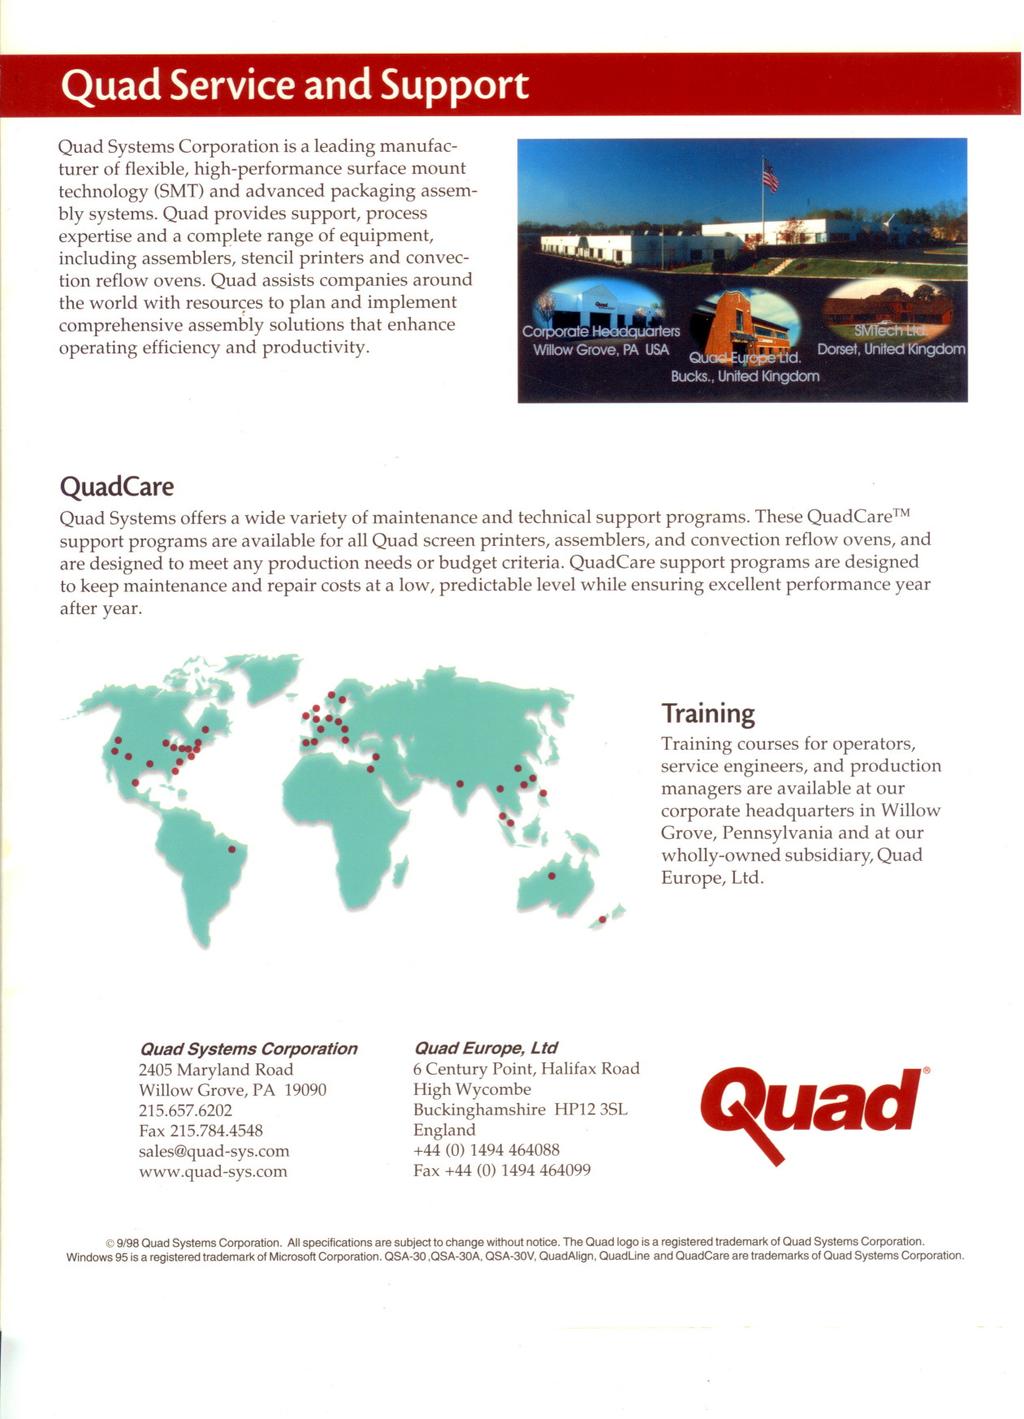 Quad Service and Support Quad Systems Corporation is a leading manufacturer of flexible, high-performance surface mount technology (SMT) and advanced packaging assembly systems.